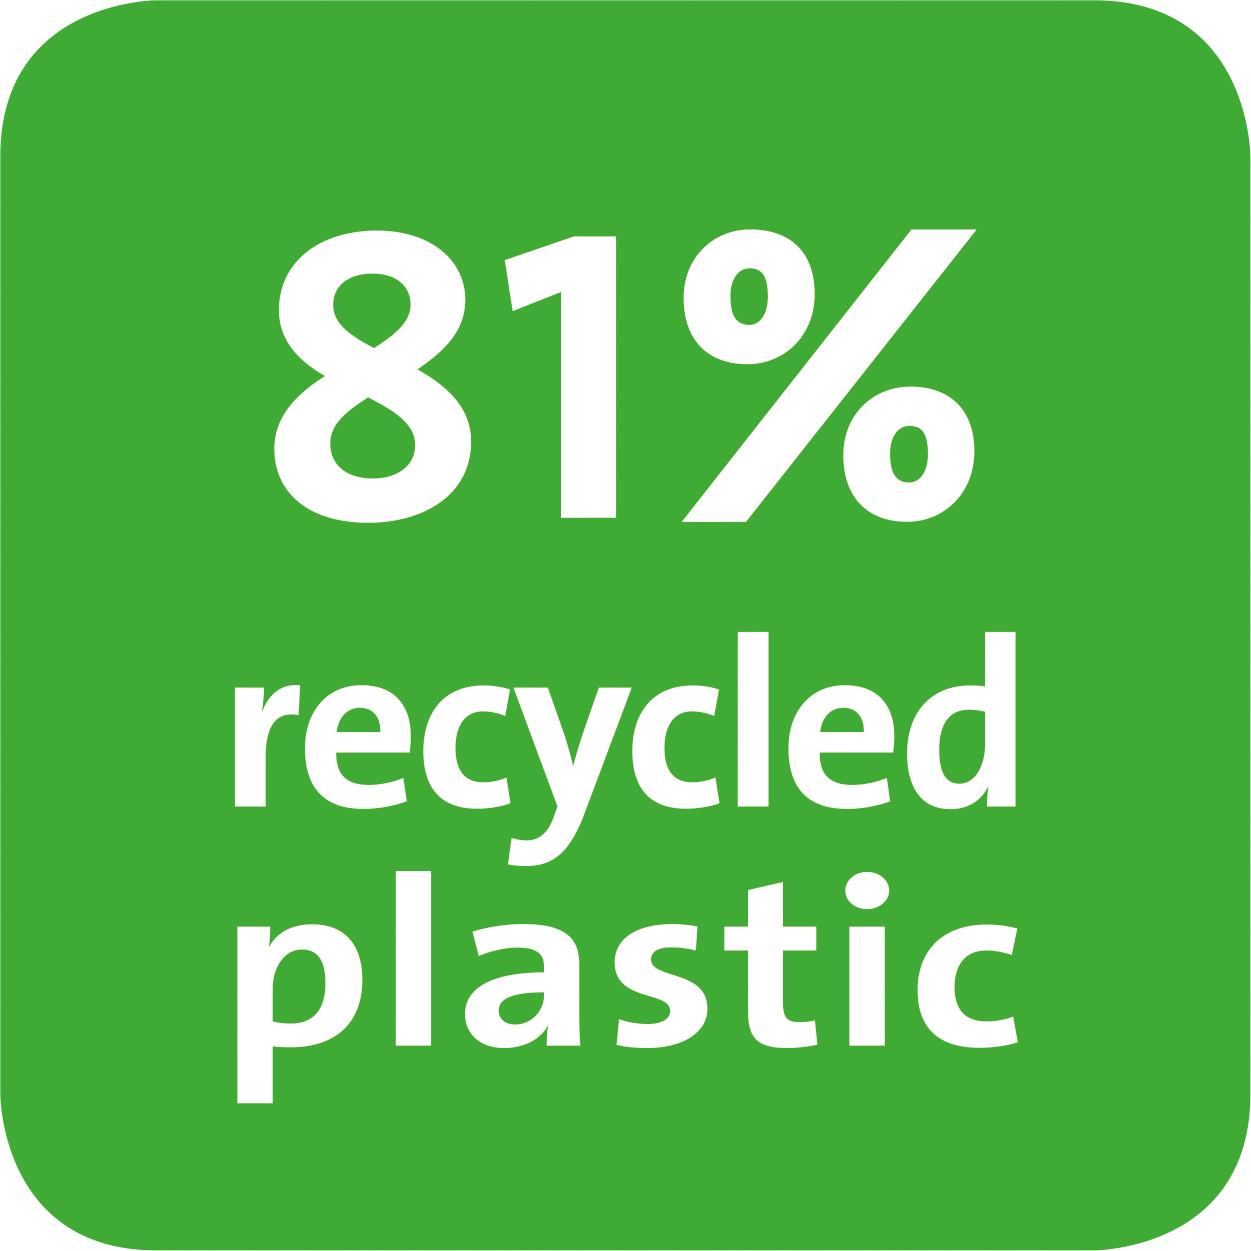 The value indicates the product’s content of recycled plastic in percent